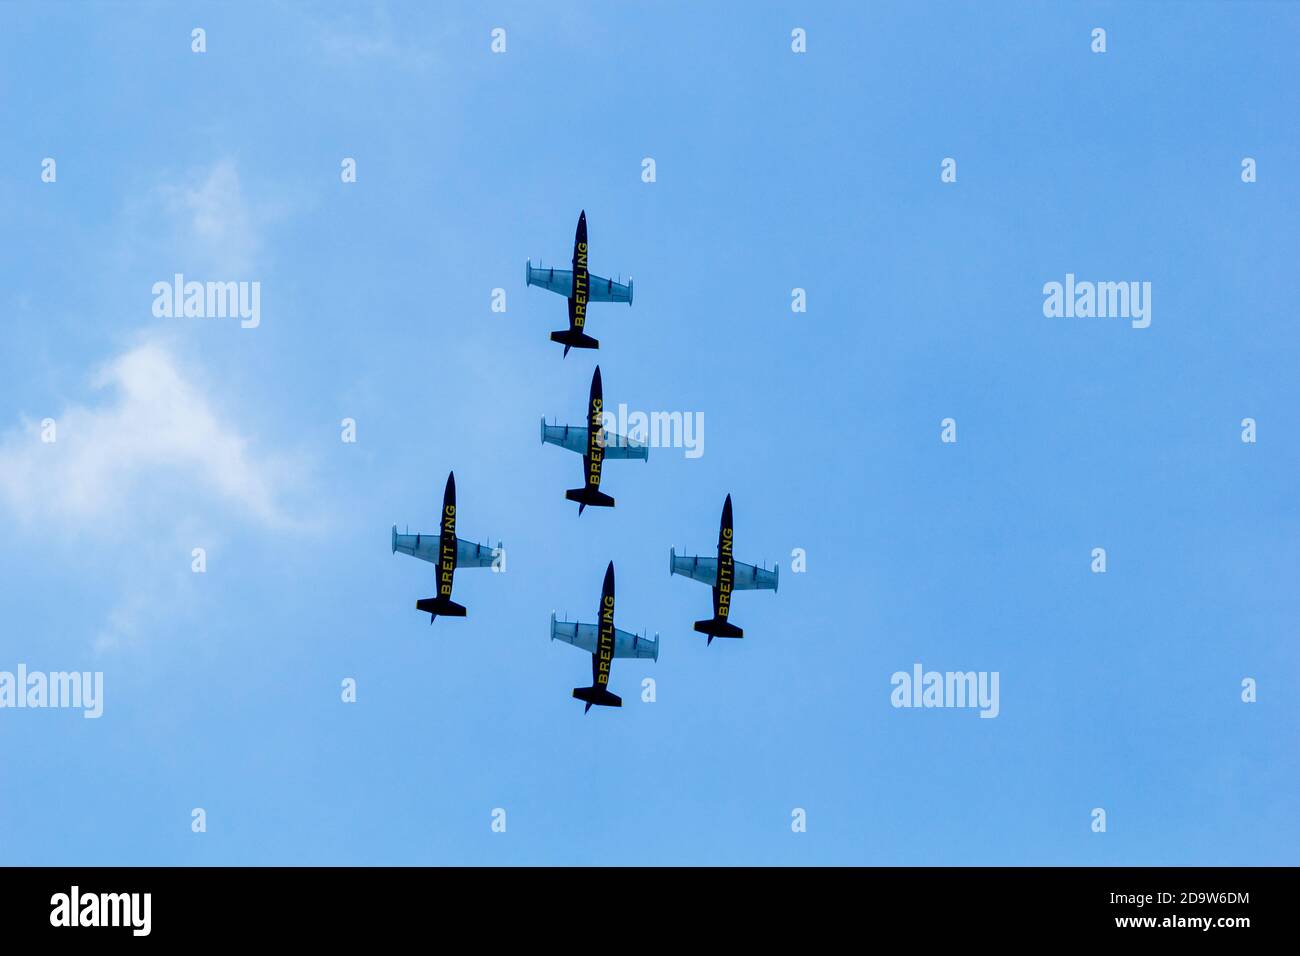 Bangkok, Thailand-March 23, 2013:The Acrobatic Breitling Jet Team performed at the event of Breitling Jet Team Under The Royal Sky at Royal Thai Air F Stock Photo